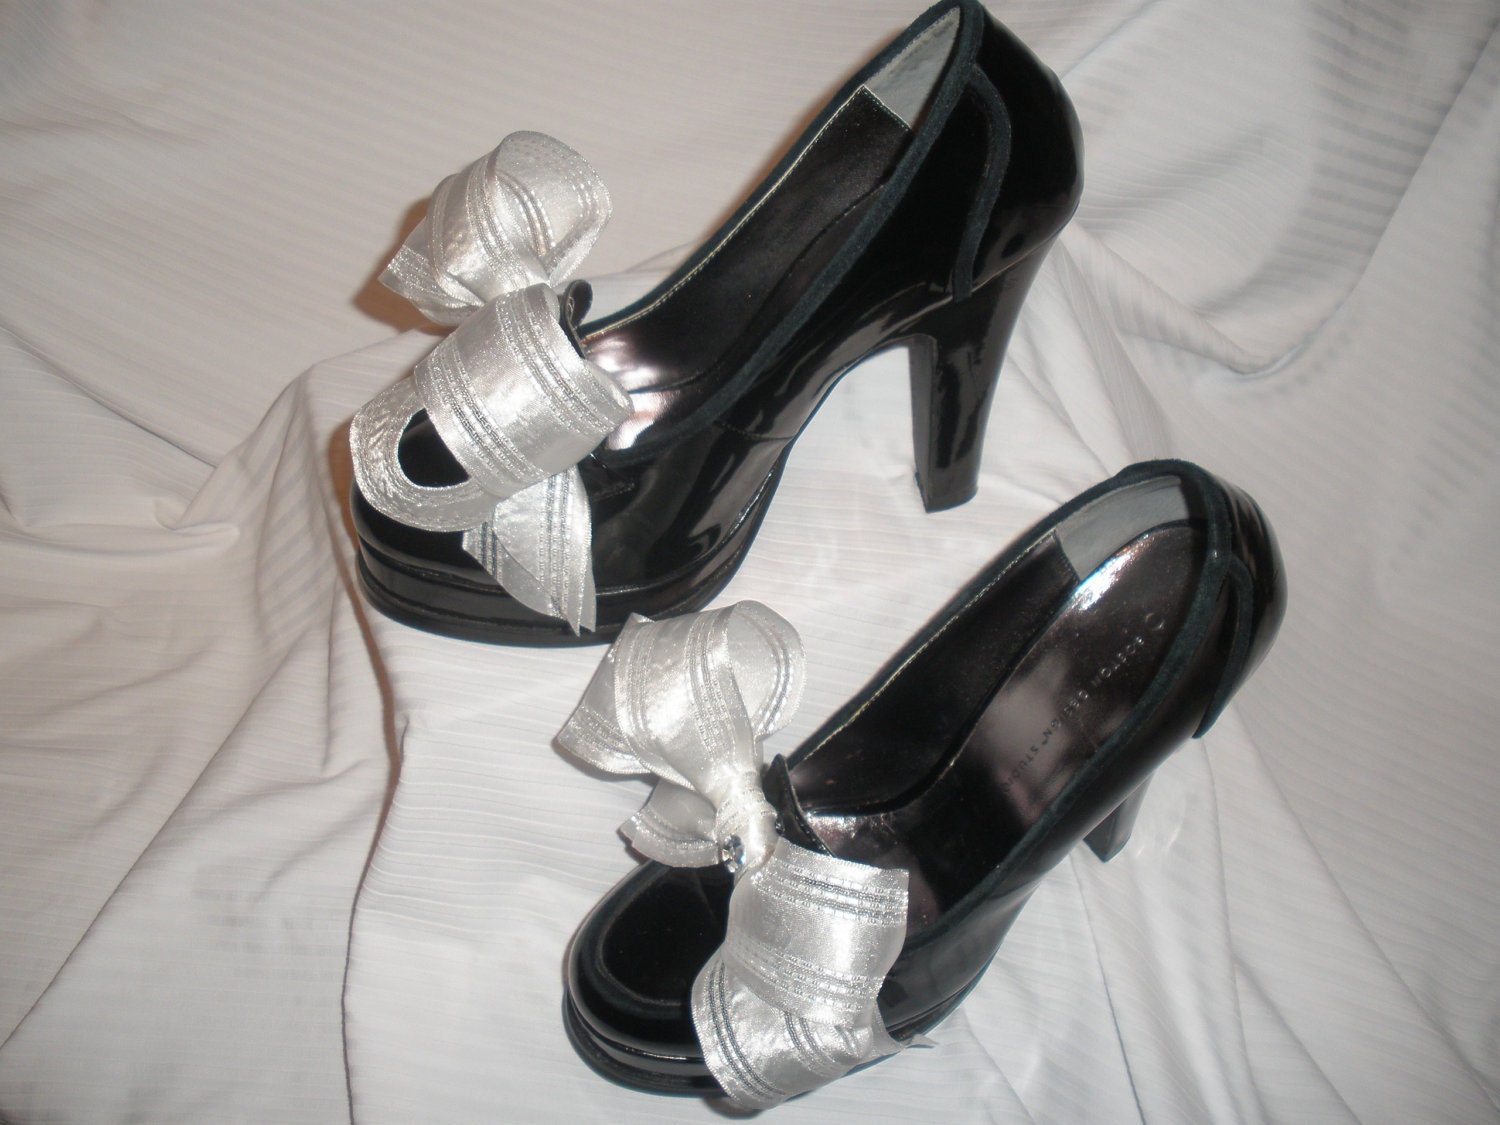 Gorgeous White Shoe Bows Stick On's w/ Beautiful Rhinestone Shoe Accessories for High Heels, Flat, Bridal Party, Women Shoes, Not Shoe Clips